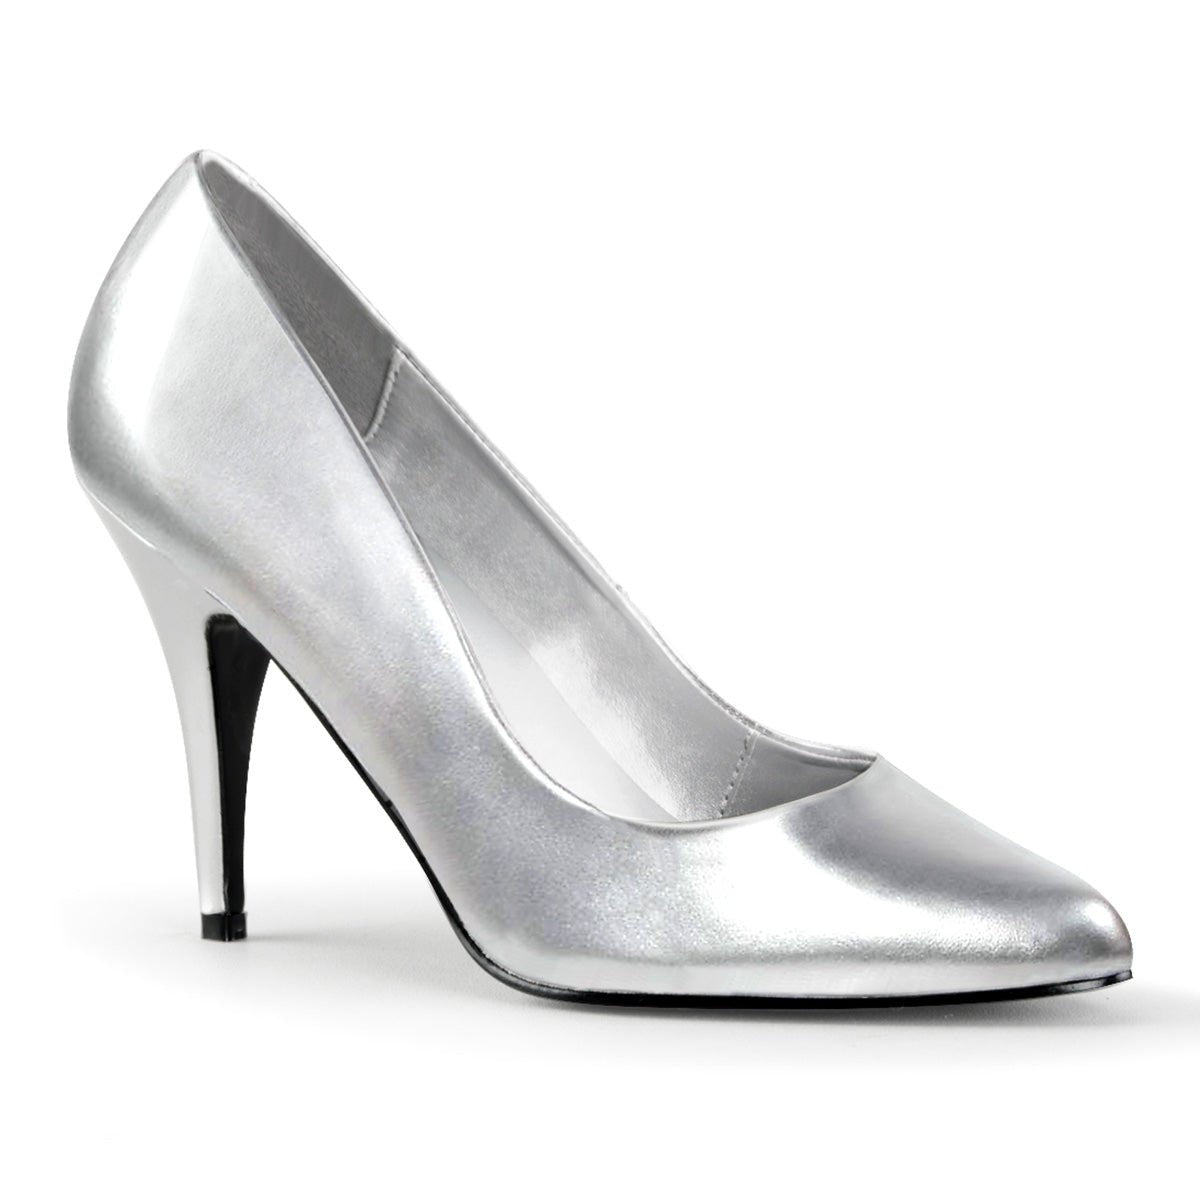 Clearance Pleaser Vanity 420 Silver Size 6UK/9USA - From Clearance Sold By Alternative Footwear